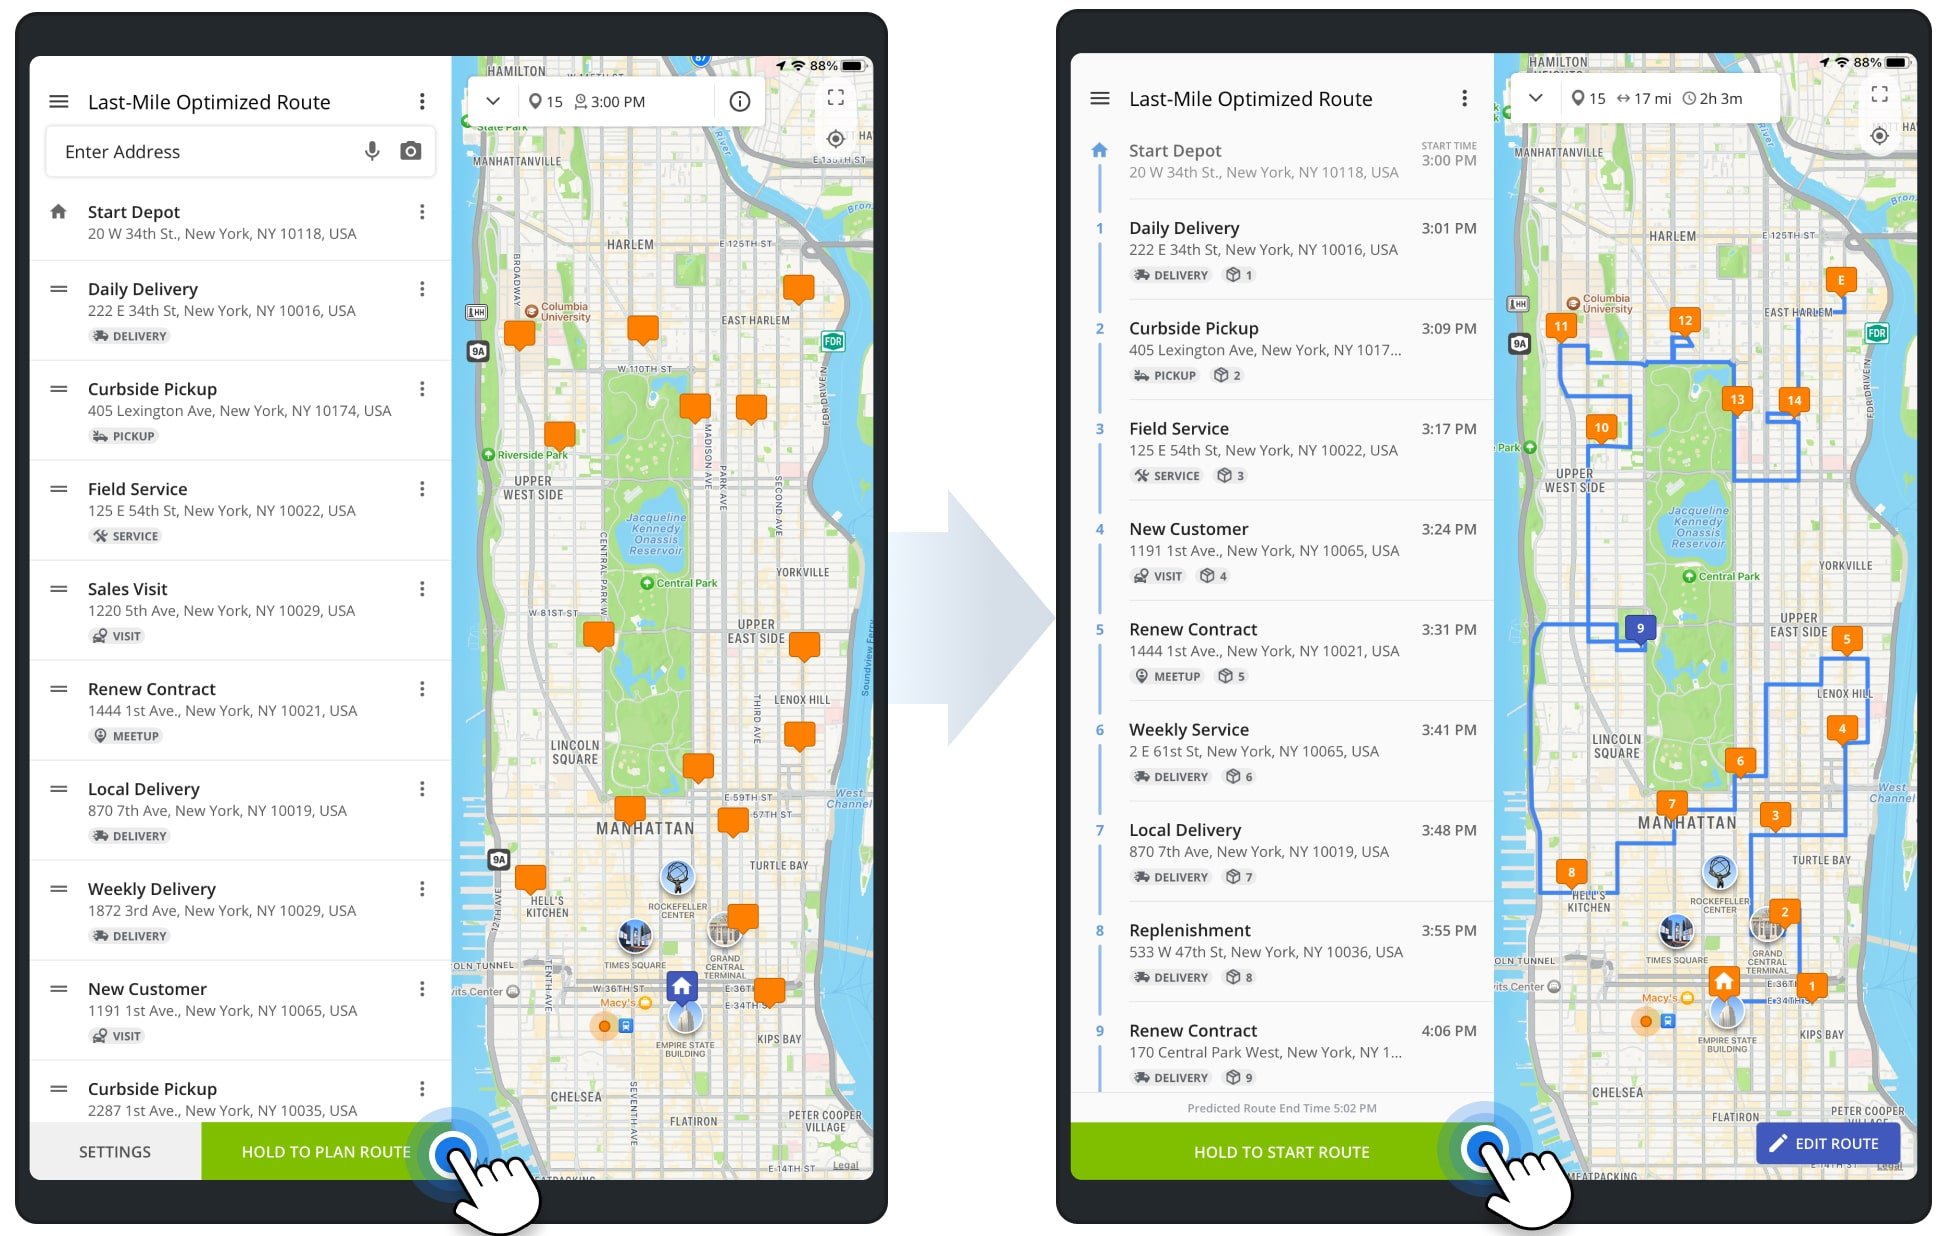 Optimizing and sequencing multi-stop route on Route4Me's Mobile iPad Route Planner app for last-mile drivers.